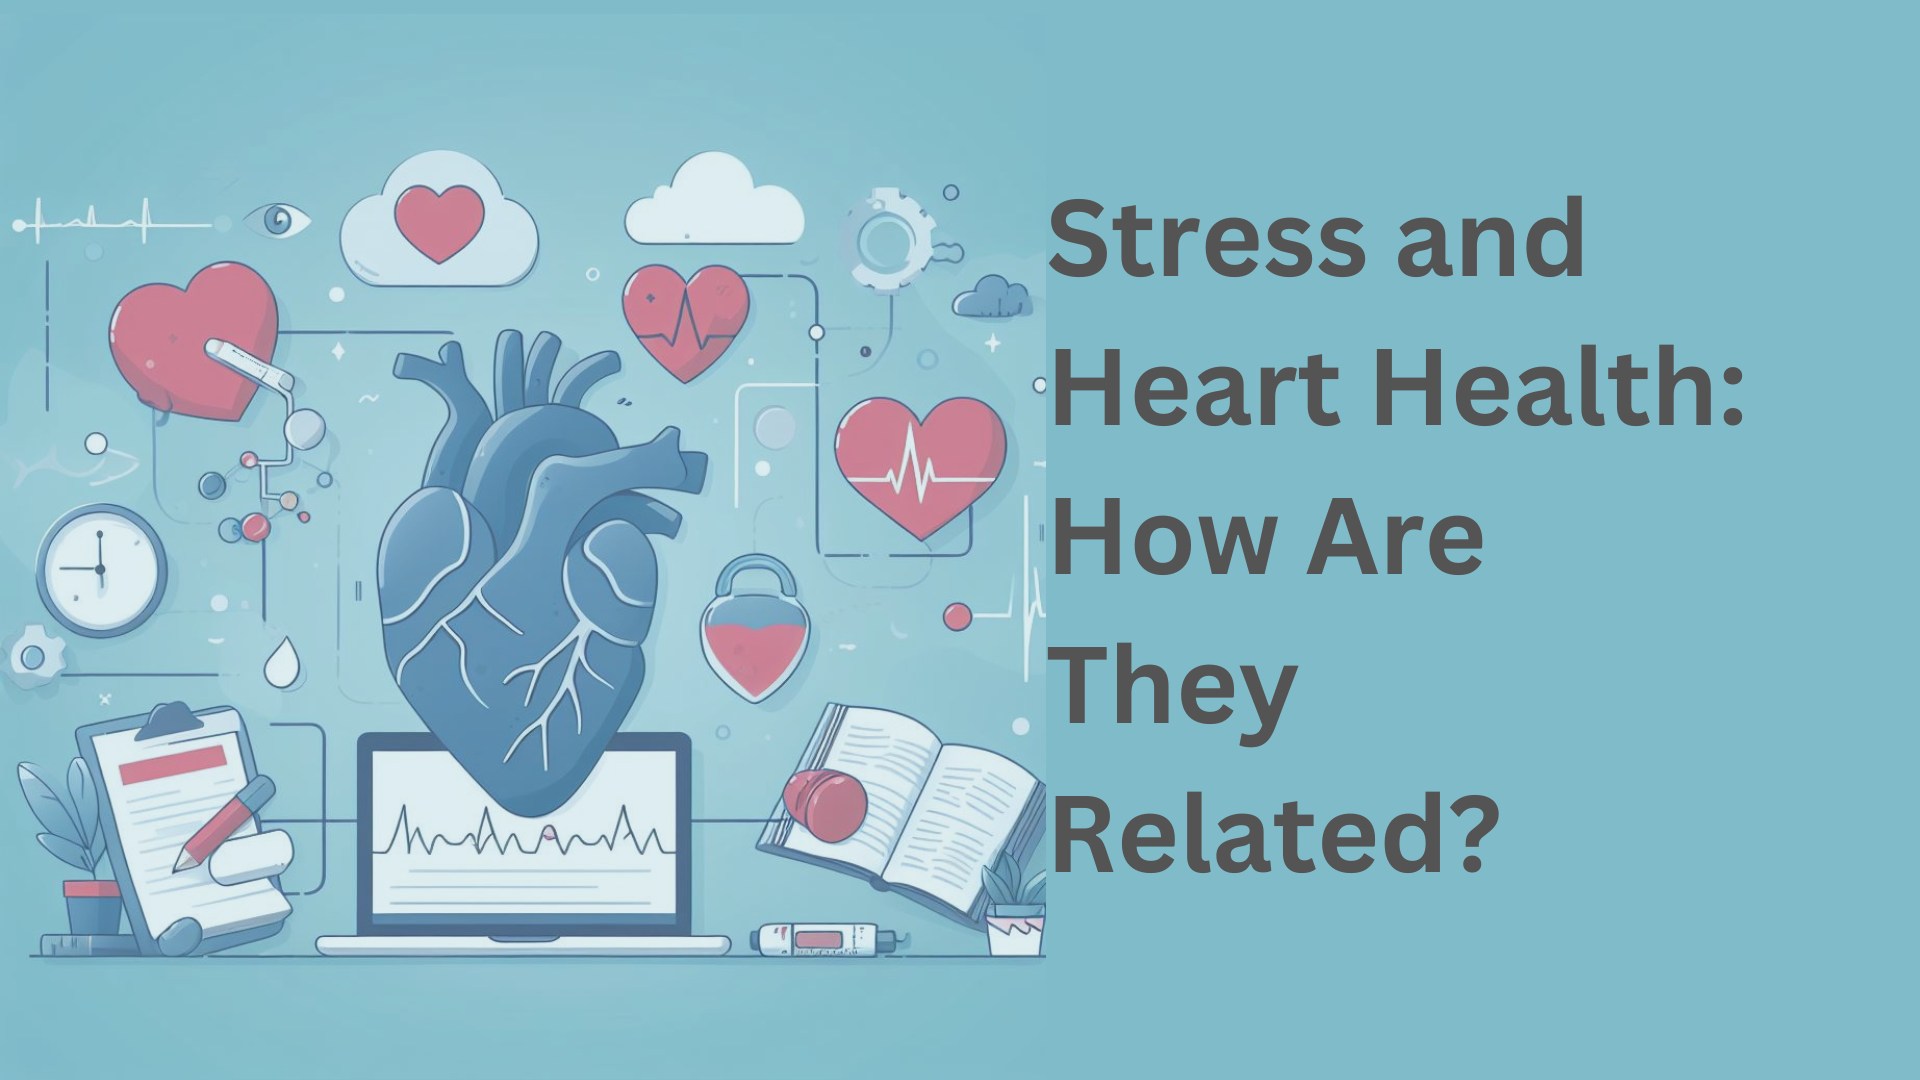 Stress and Heart Health: How Are They Related?